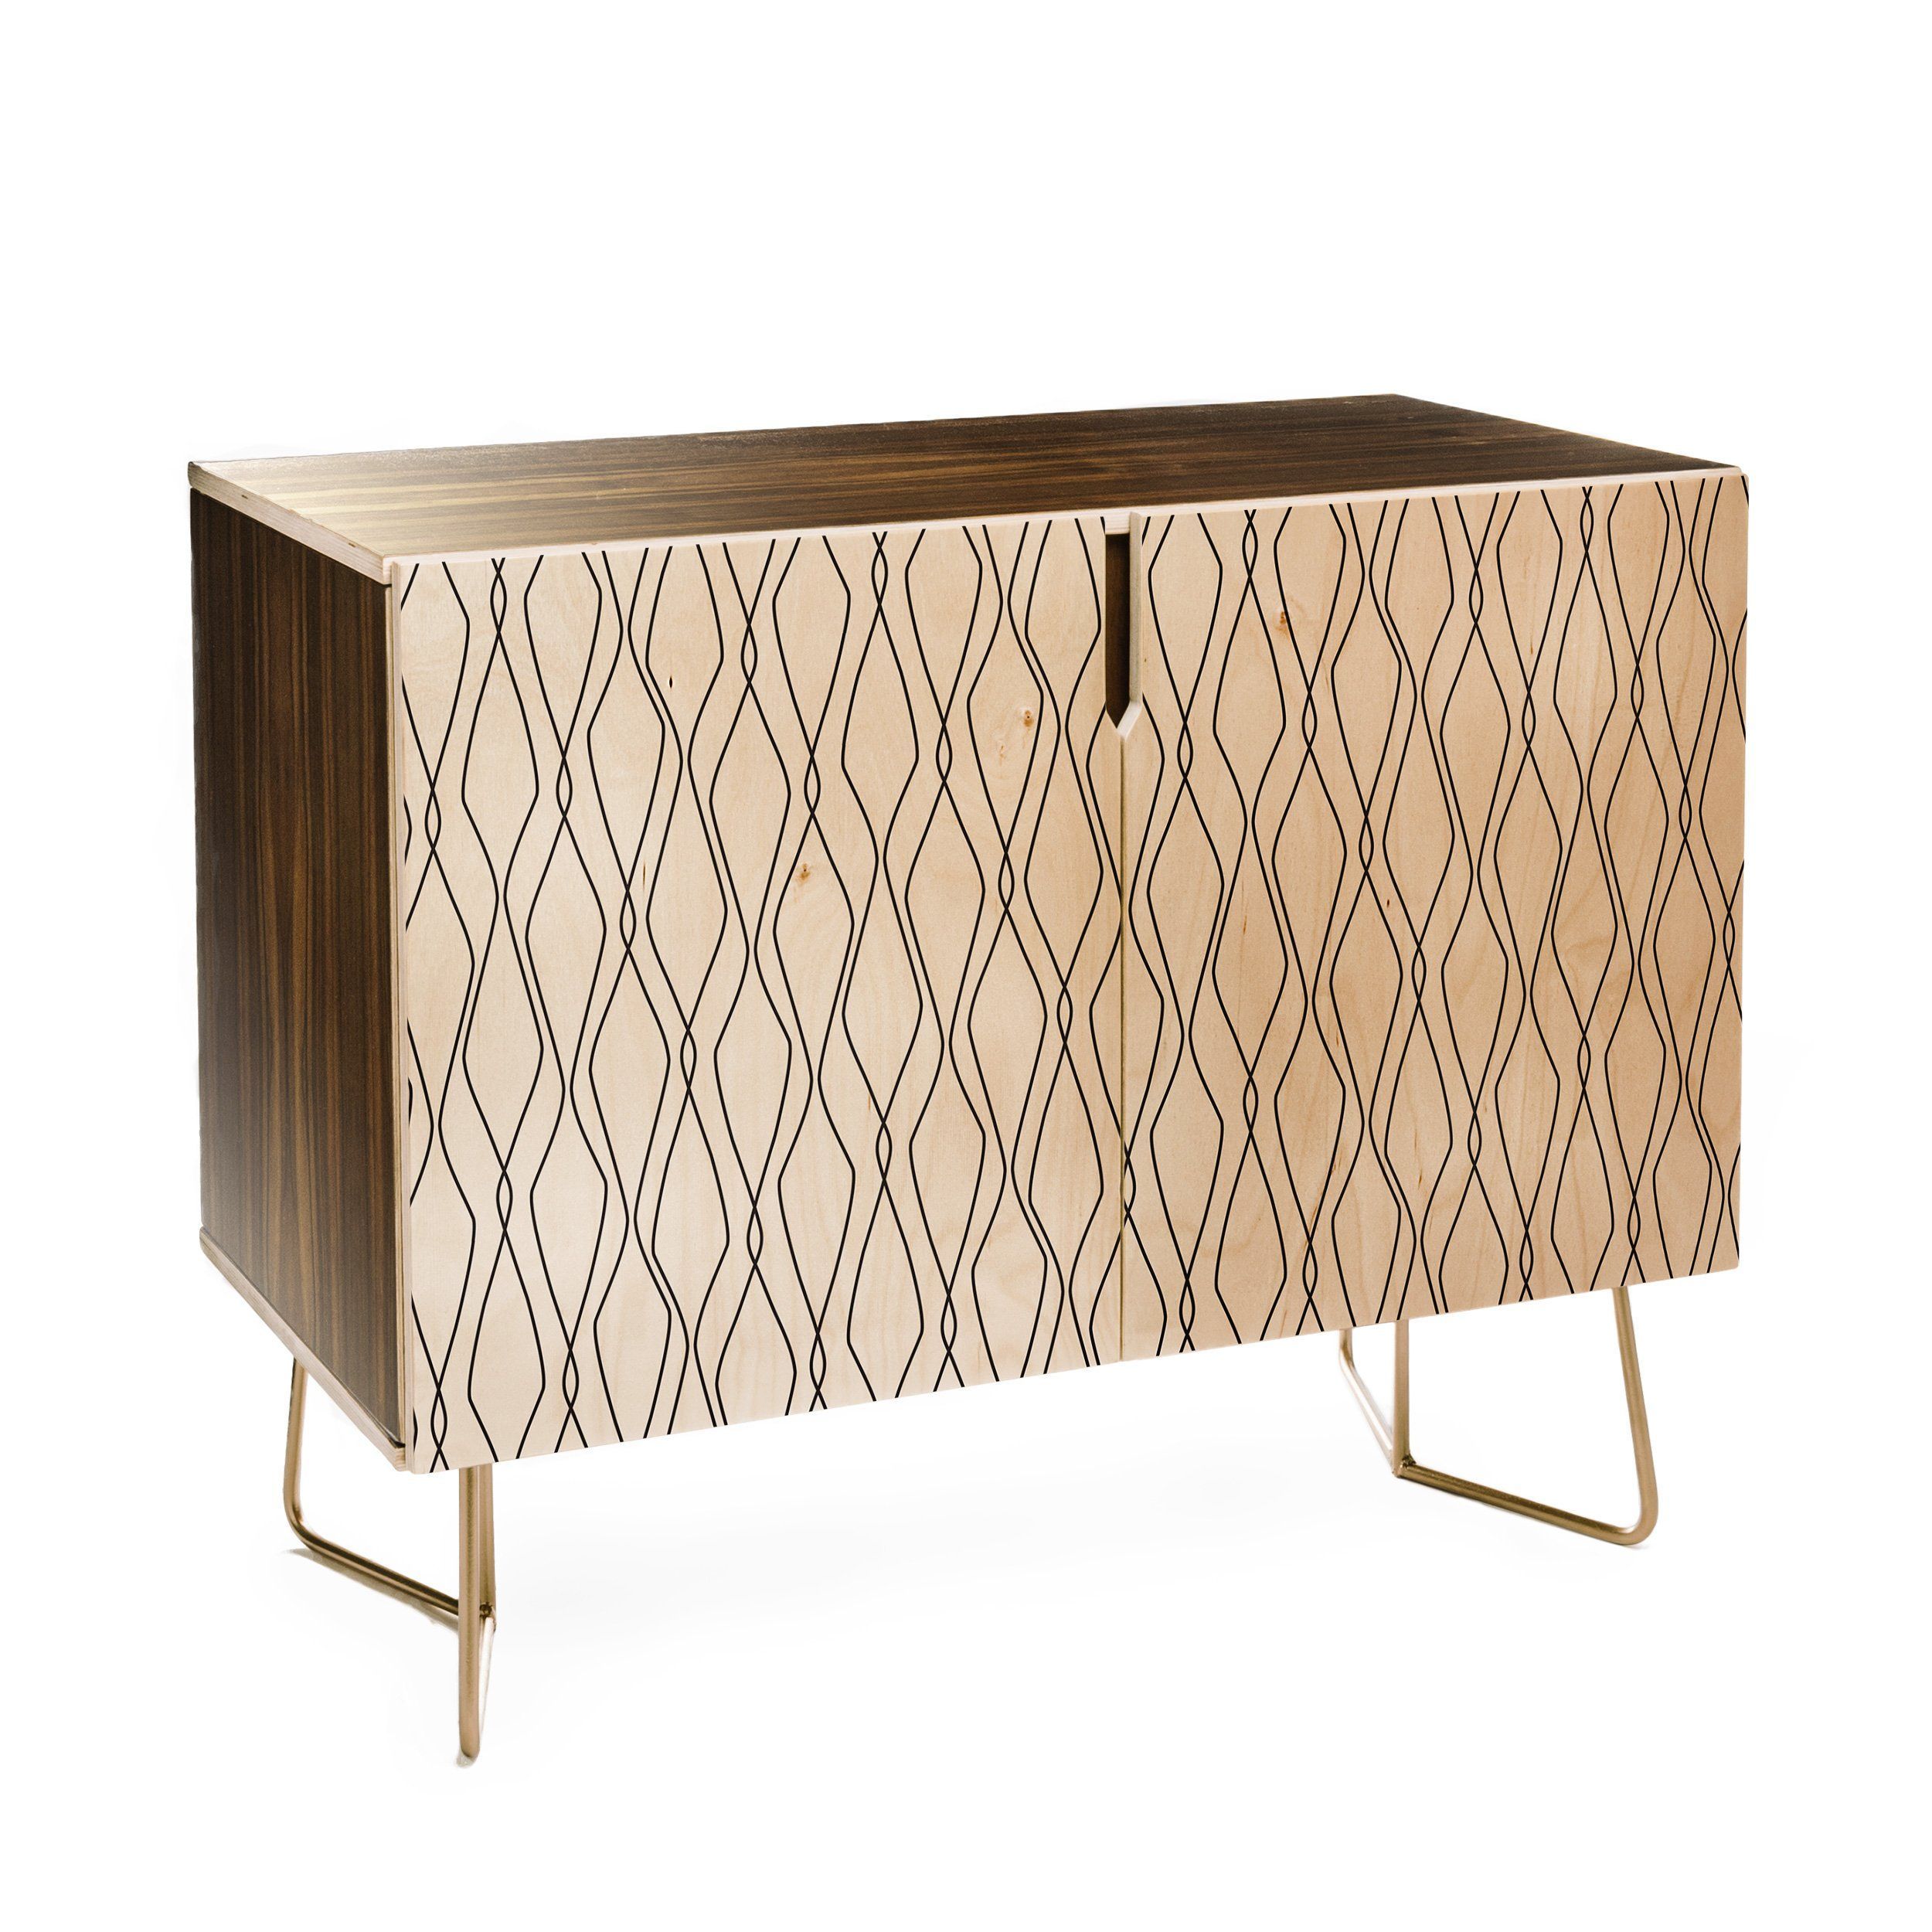 Heather Dutton Fuge Stone Credenza | Burns' Jardin Research With Neon Bloom Credenzas (View 13 of 30)